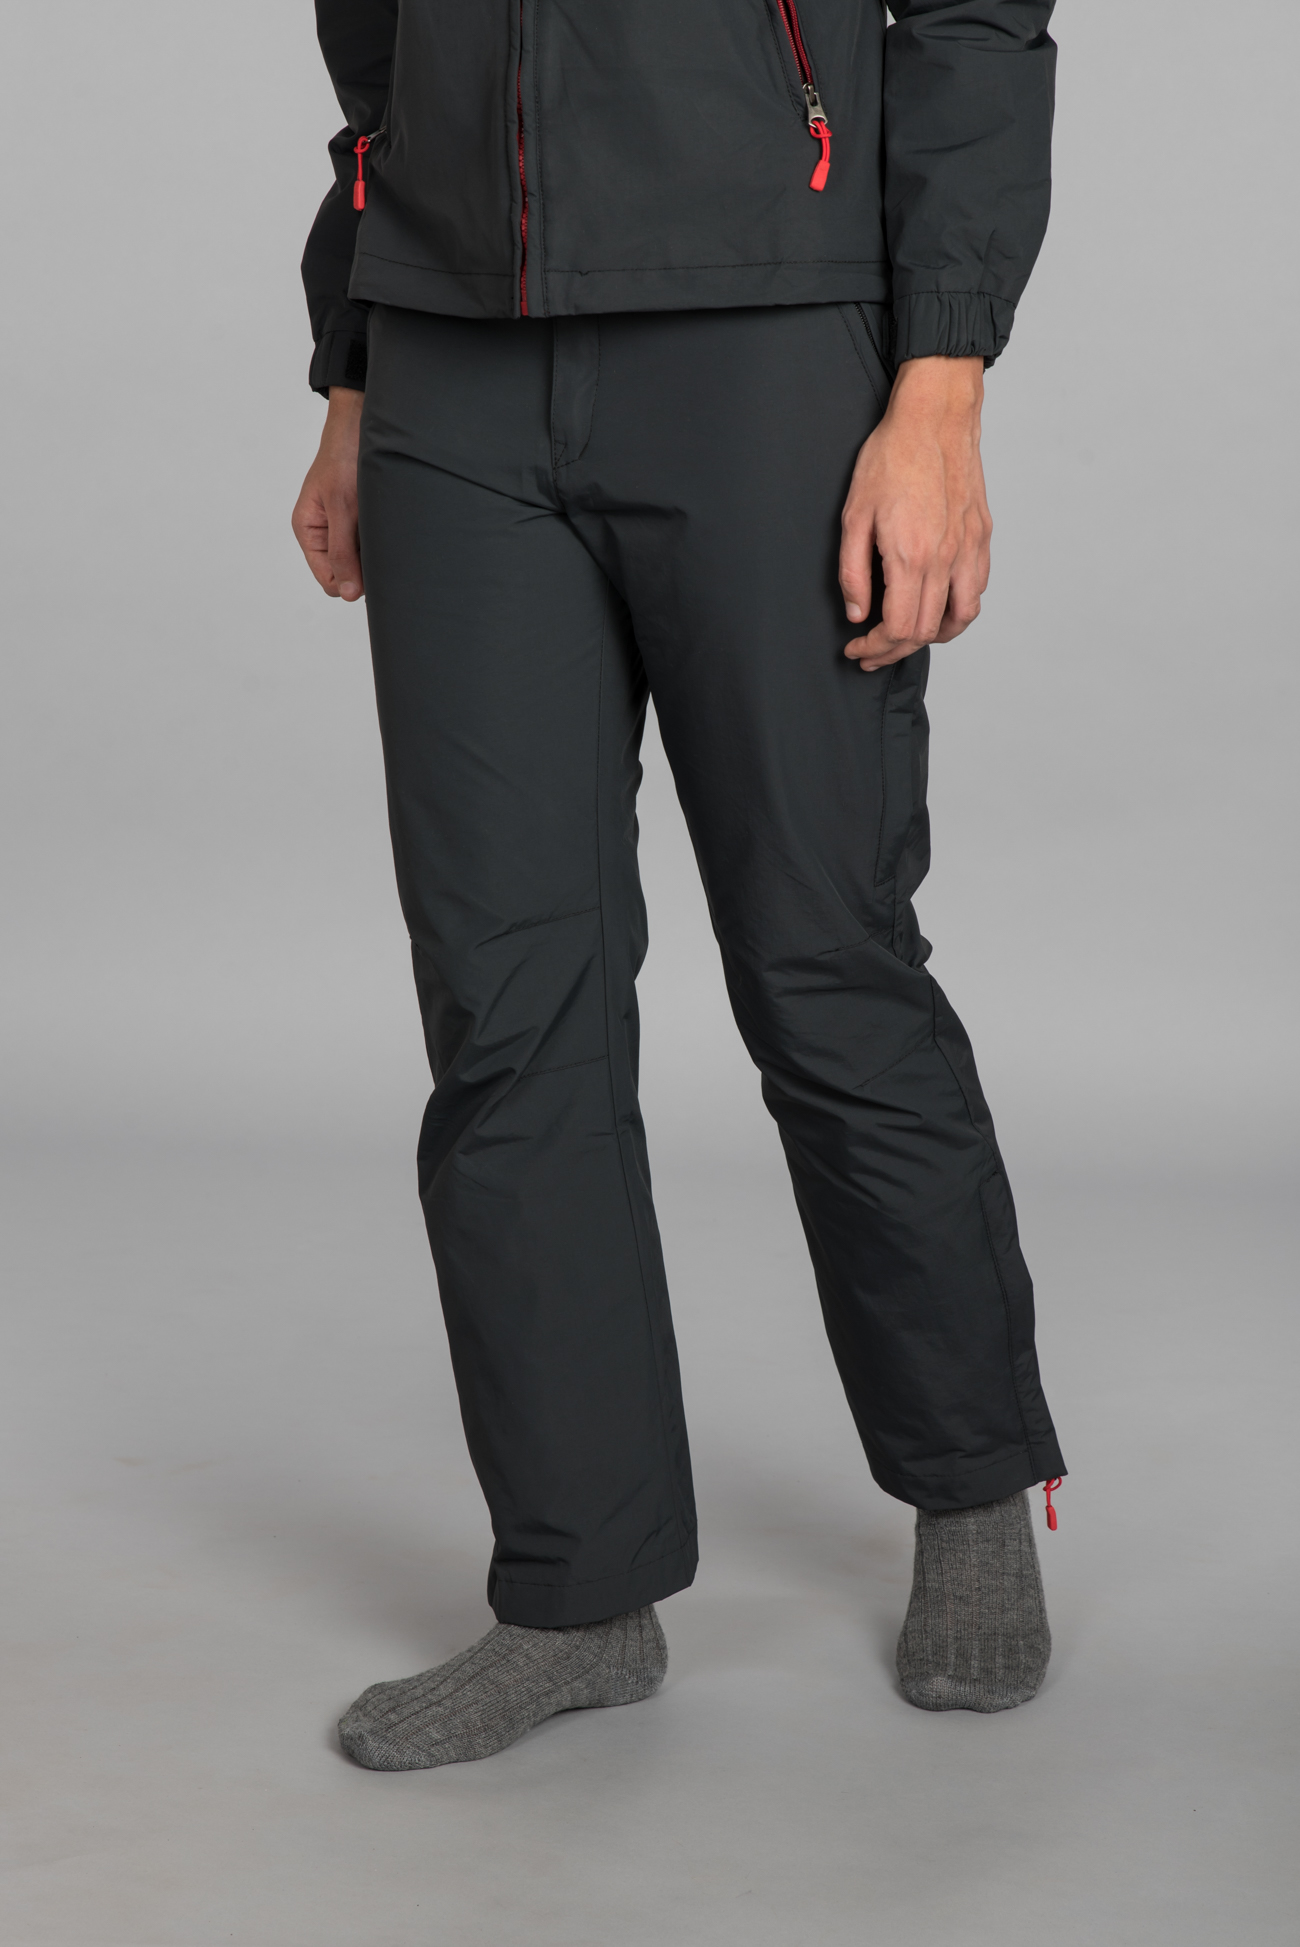 Share more than 80 ladies waterproof trousers super hot - in.duhocakina